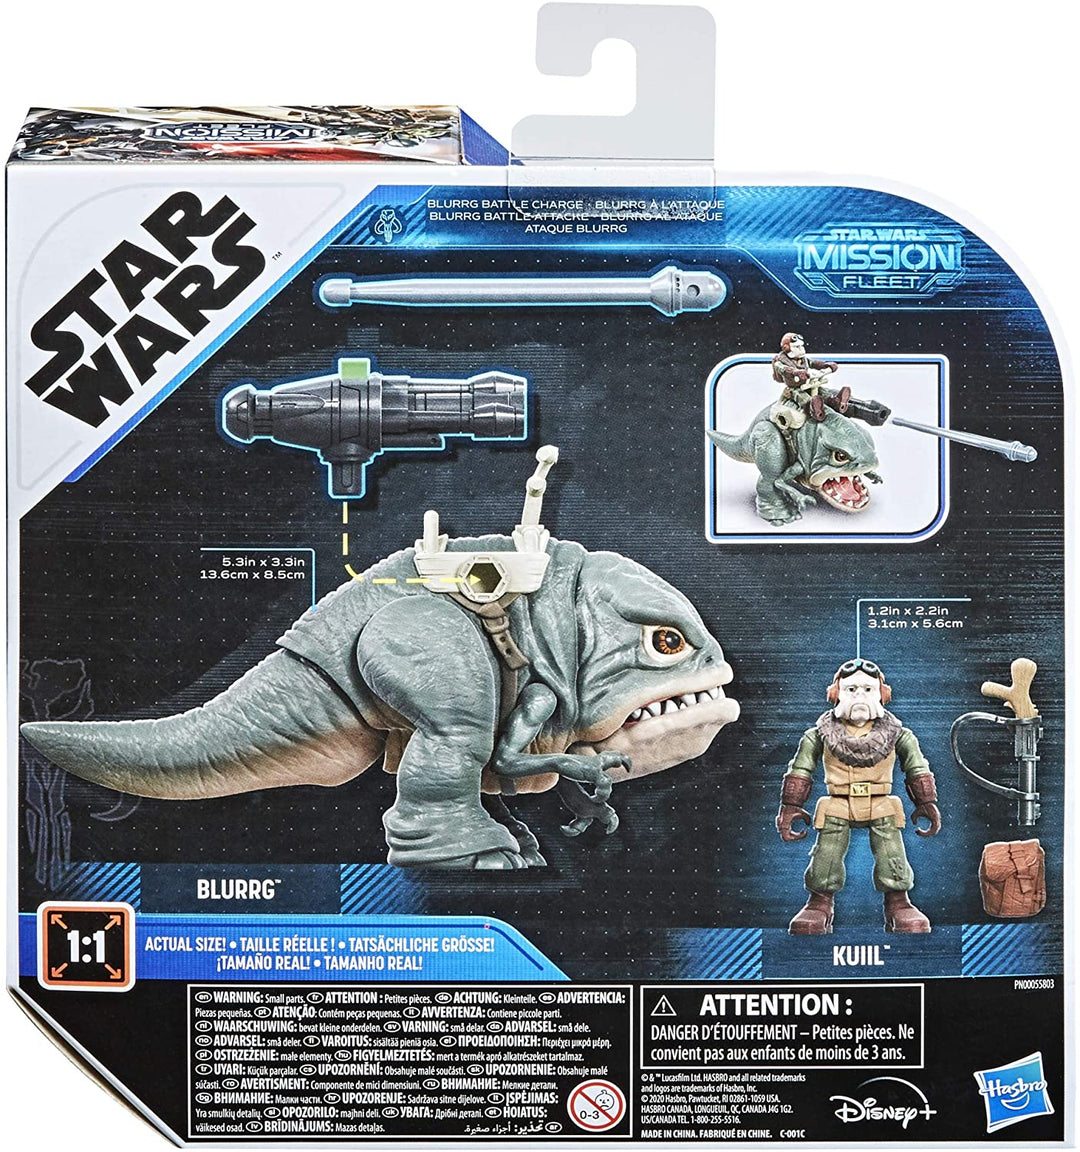 Star Wars Mission Fleet Expedition Class Kuiil con Blurrg Toys, Blurrg Battle Charge Action Figure in scala 6 cm